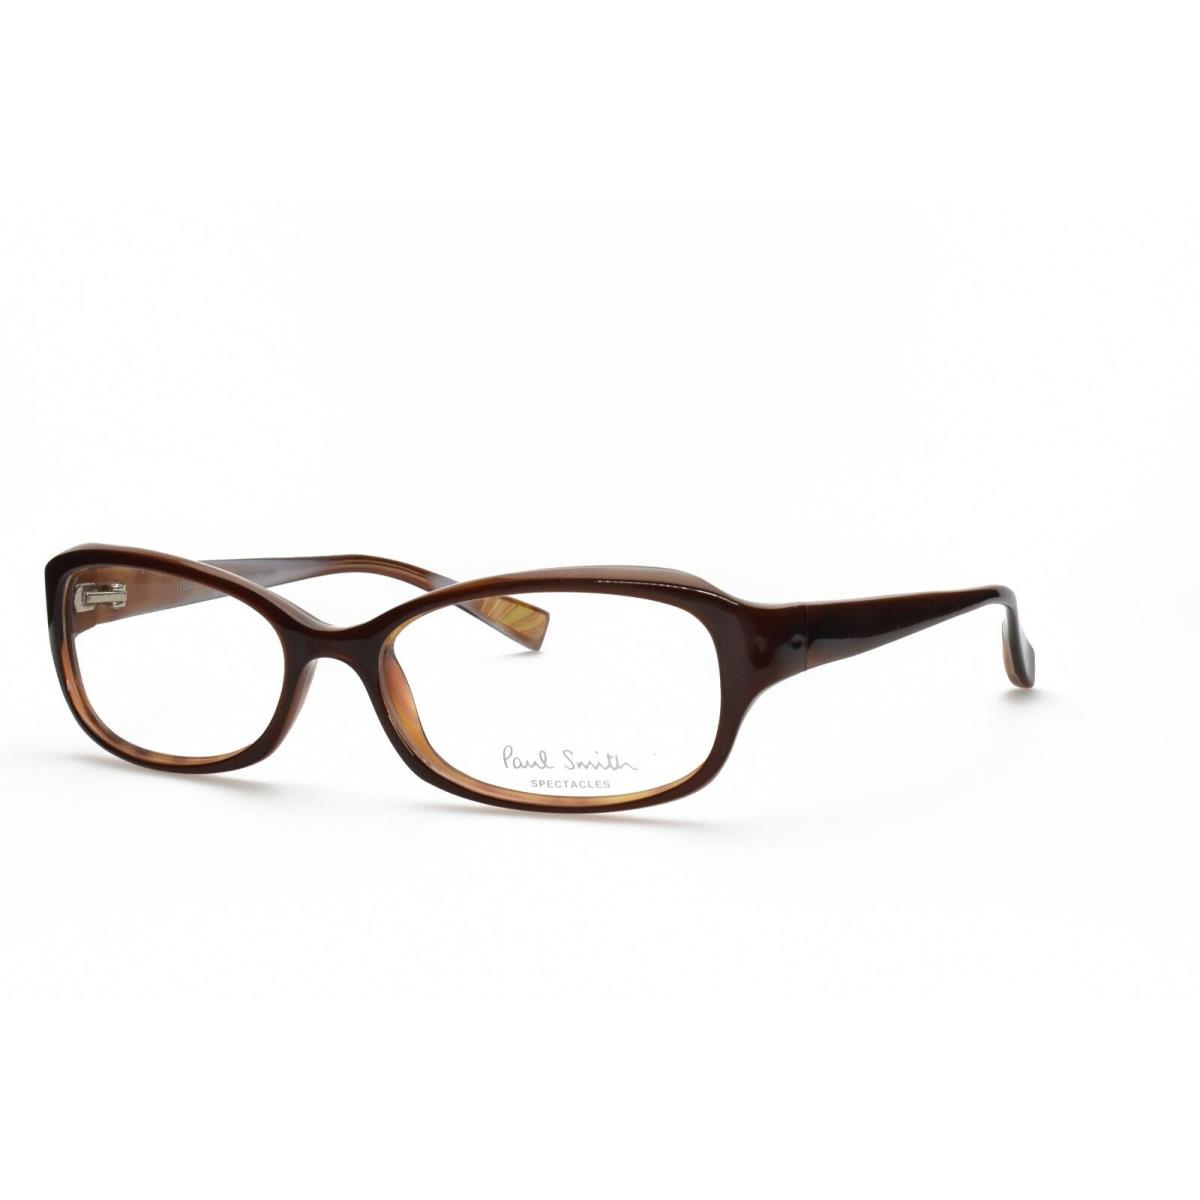 Paul Smith PS 289 Borbh Eyeglasses Frames Only 53-17-130